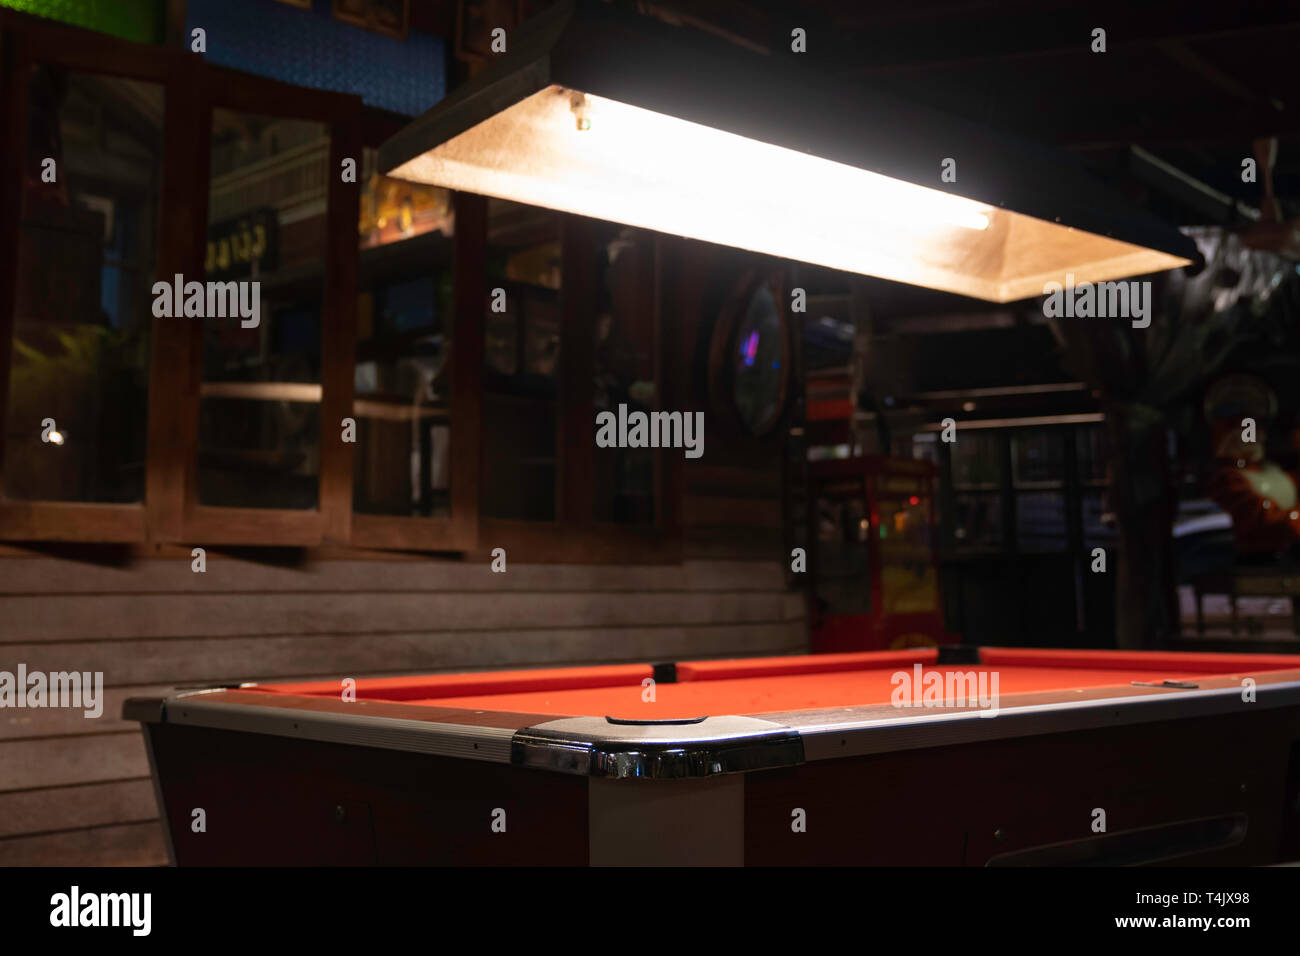 Vintage pool table in night club, pool snooker billiard concept background. Stock Photo